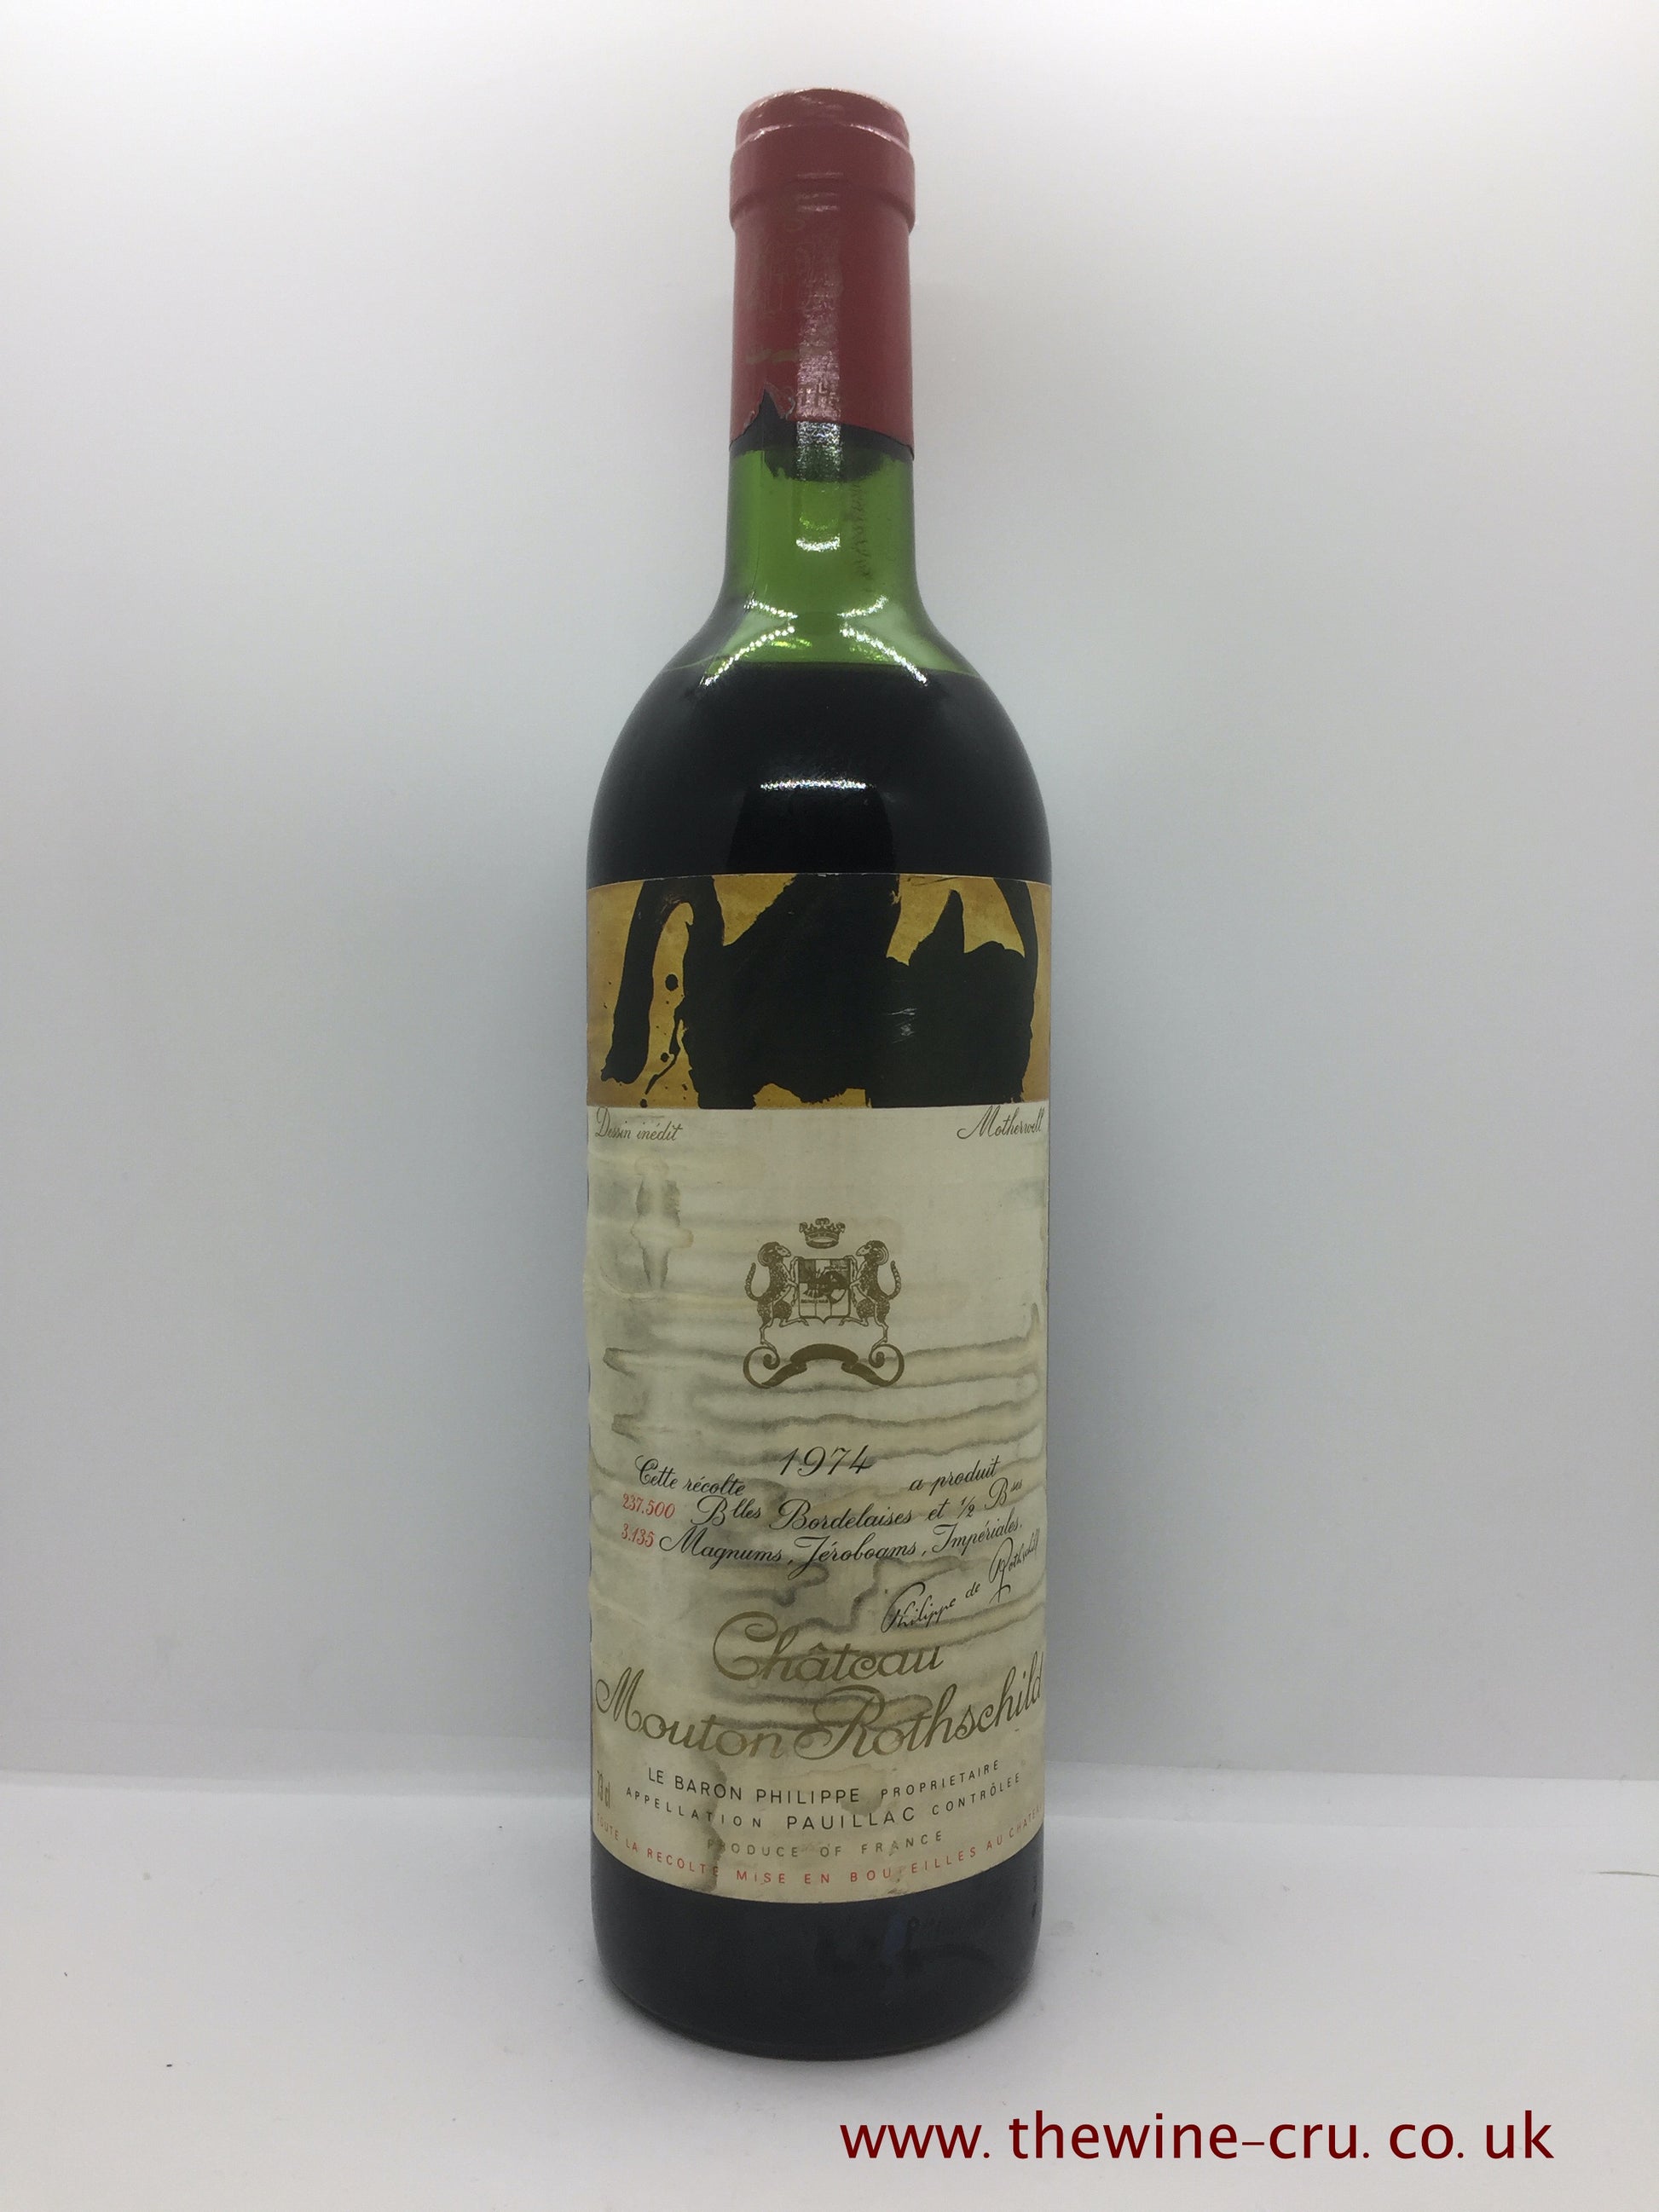 A bottle of 1974 vintage red wine. Chateau Mouton Rothschild. Bordeaux, France. The bottle is in good condition. The label is glue stripped and a little stained. The wine level is high shoulder. Immediate delivery. Free local delivery. Gift wrapping available.